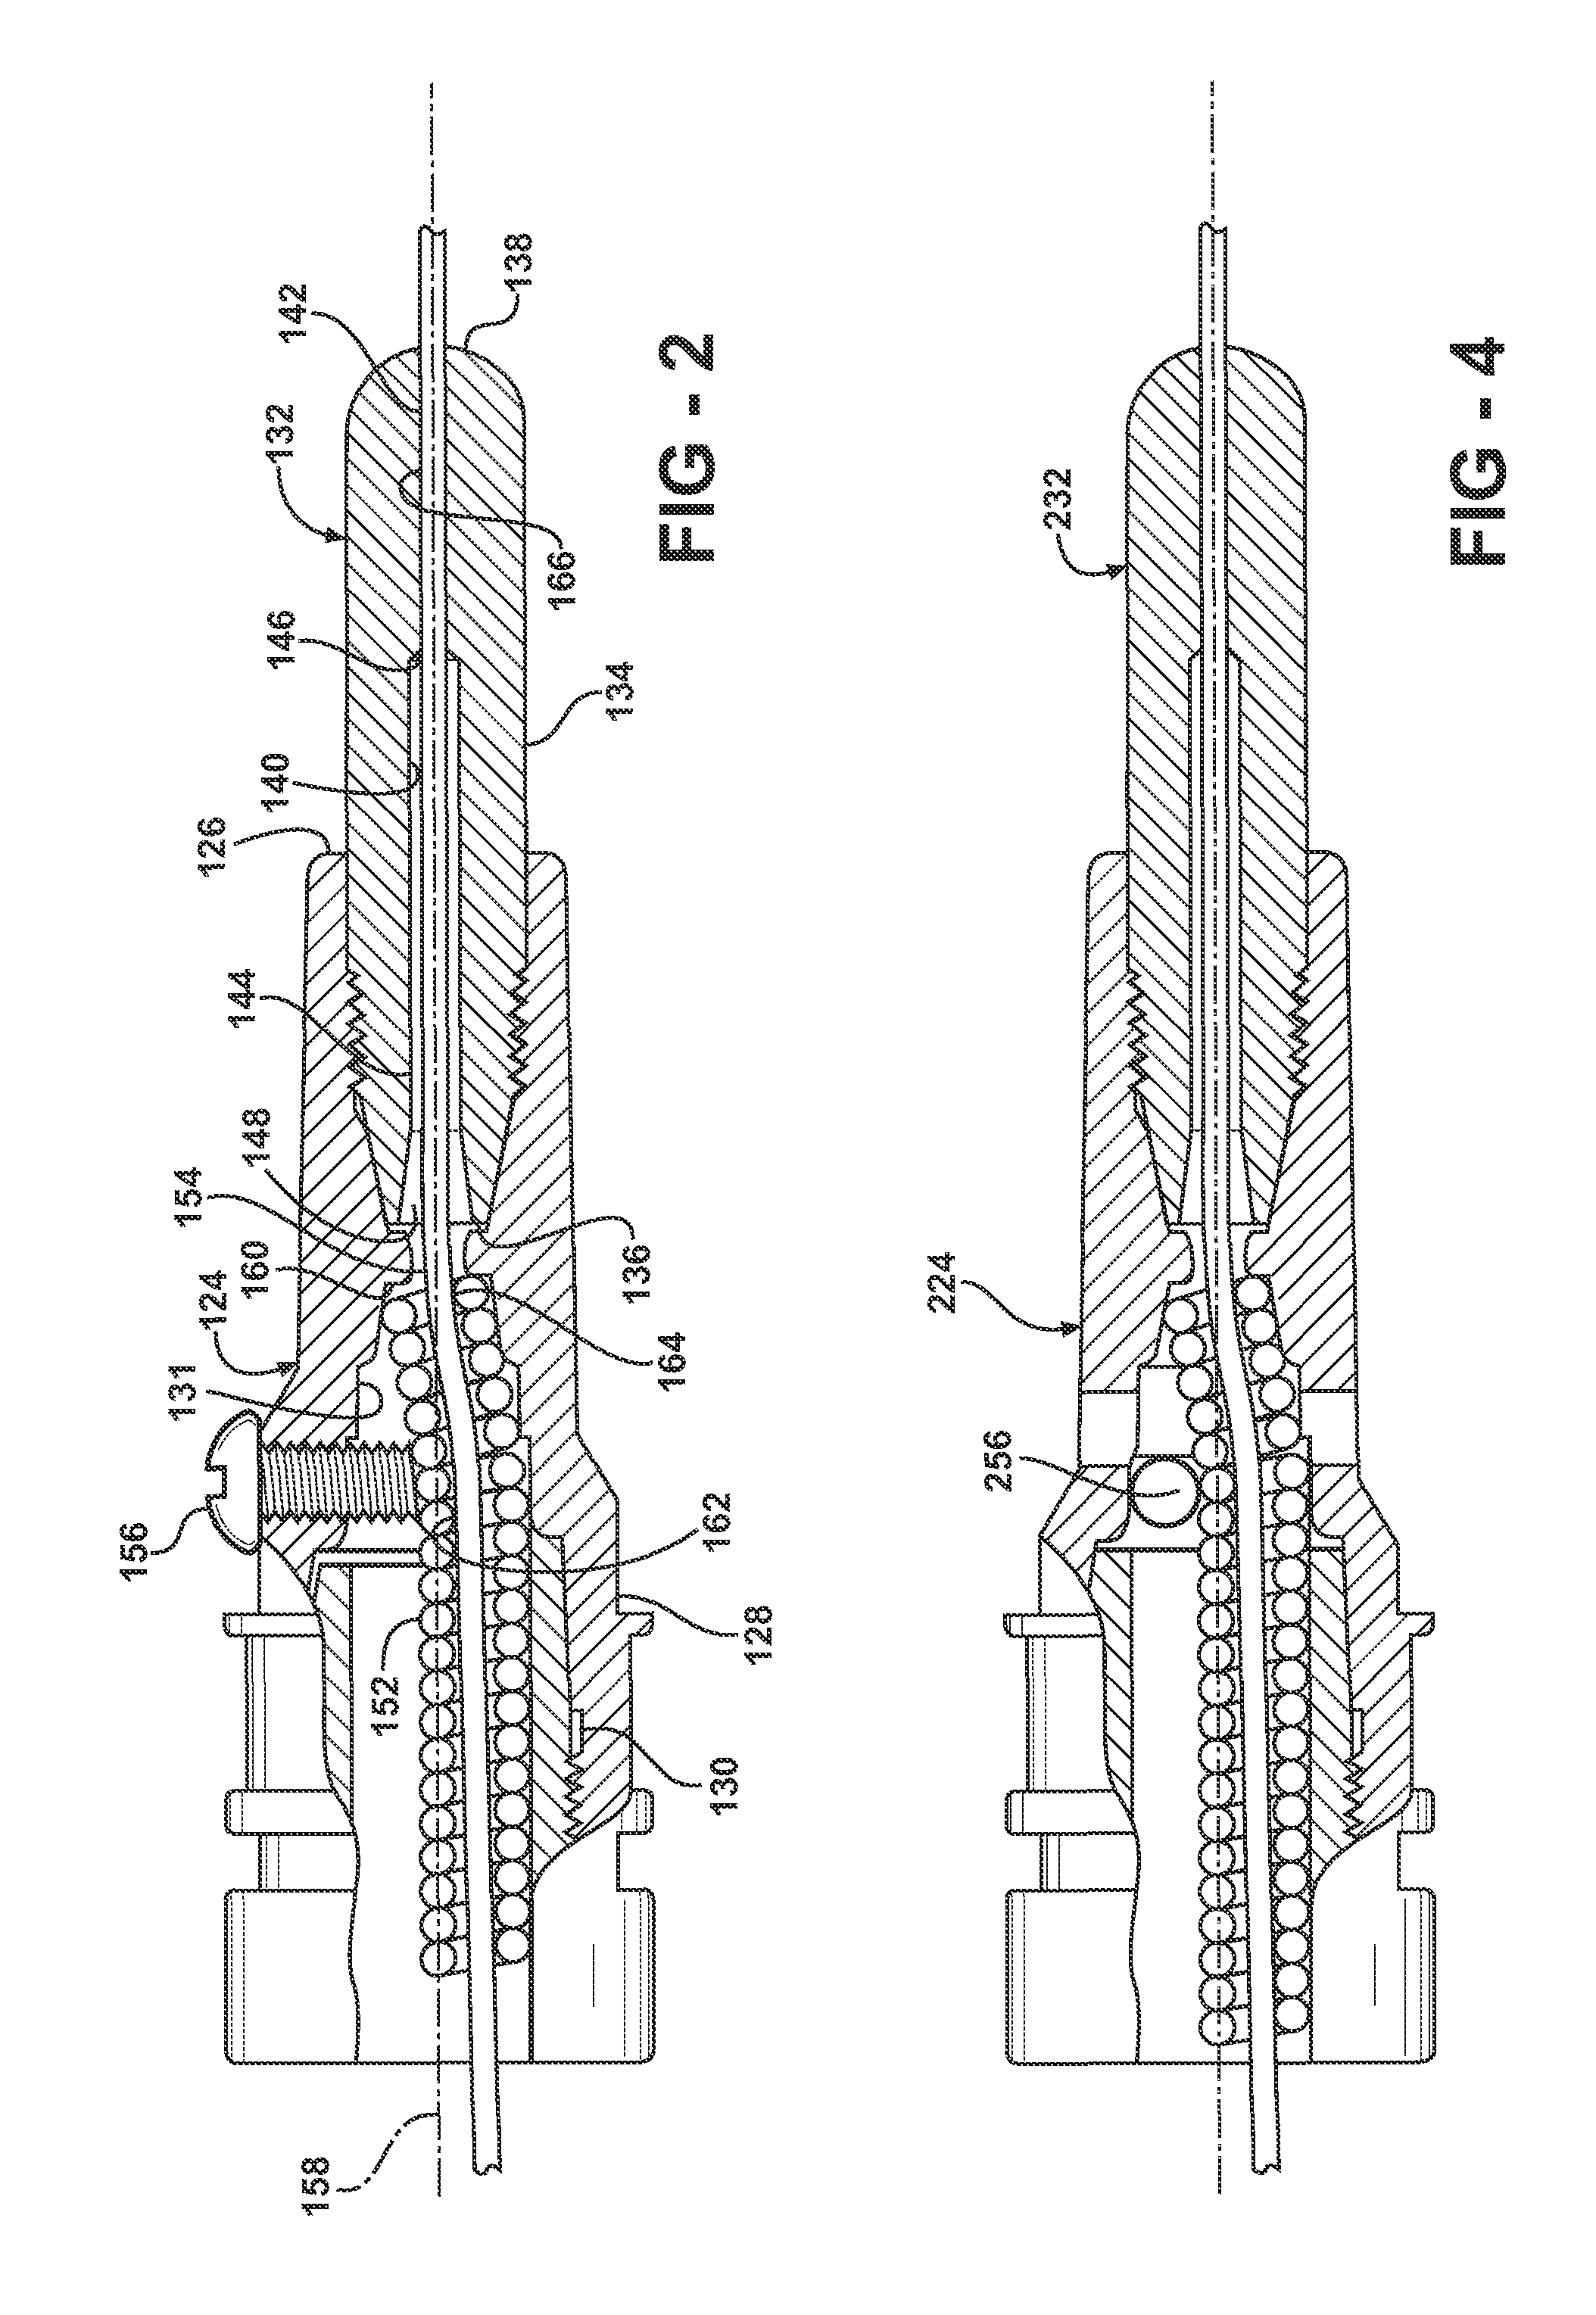 Retaining head and contact tip for controlling wire contour and contacting point for GMAW torches